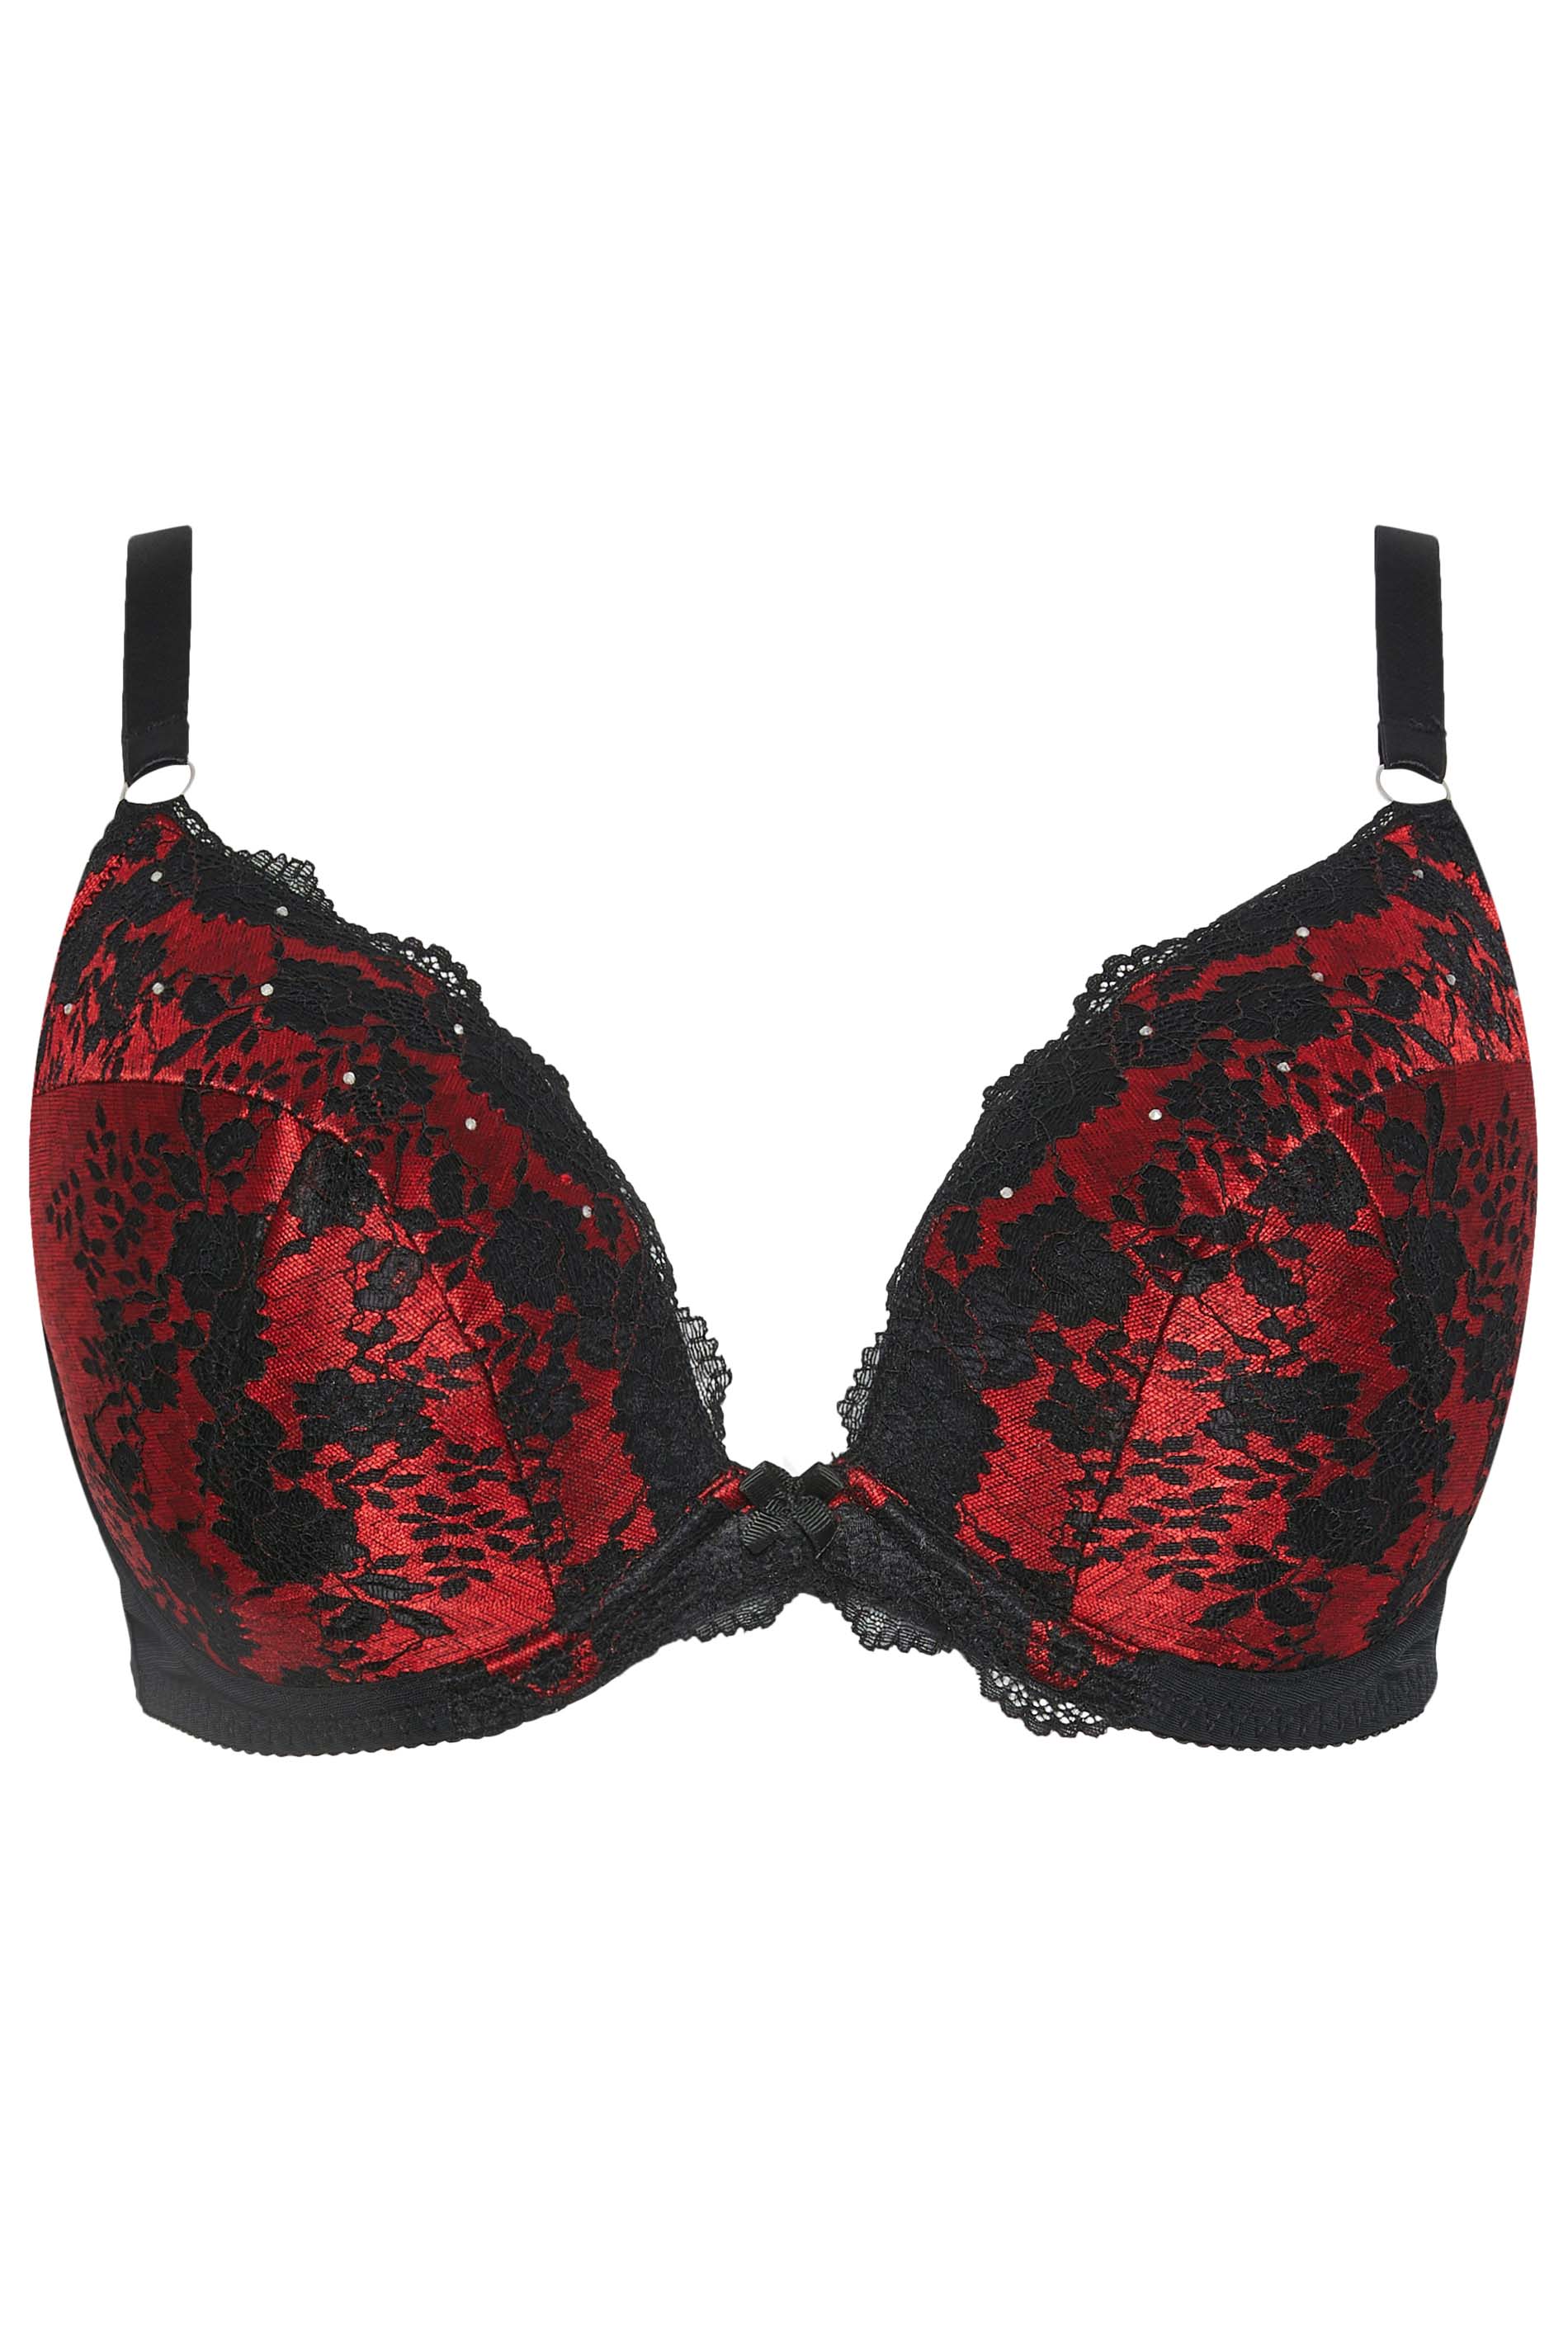 Red and Black Lace Cupless Bra Set Plus Size 8 - 22